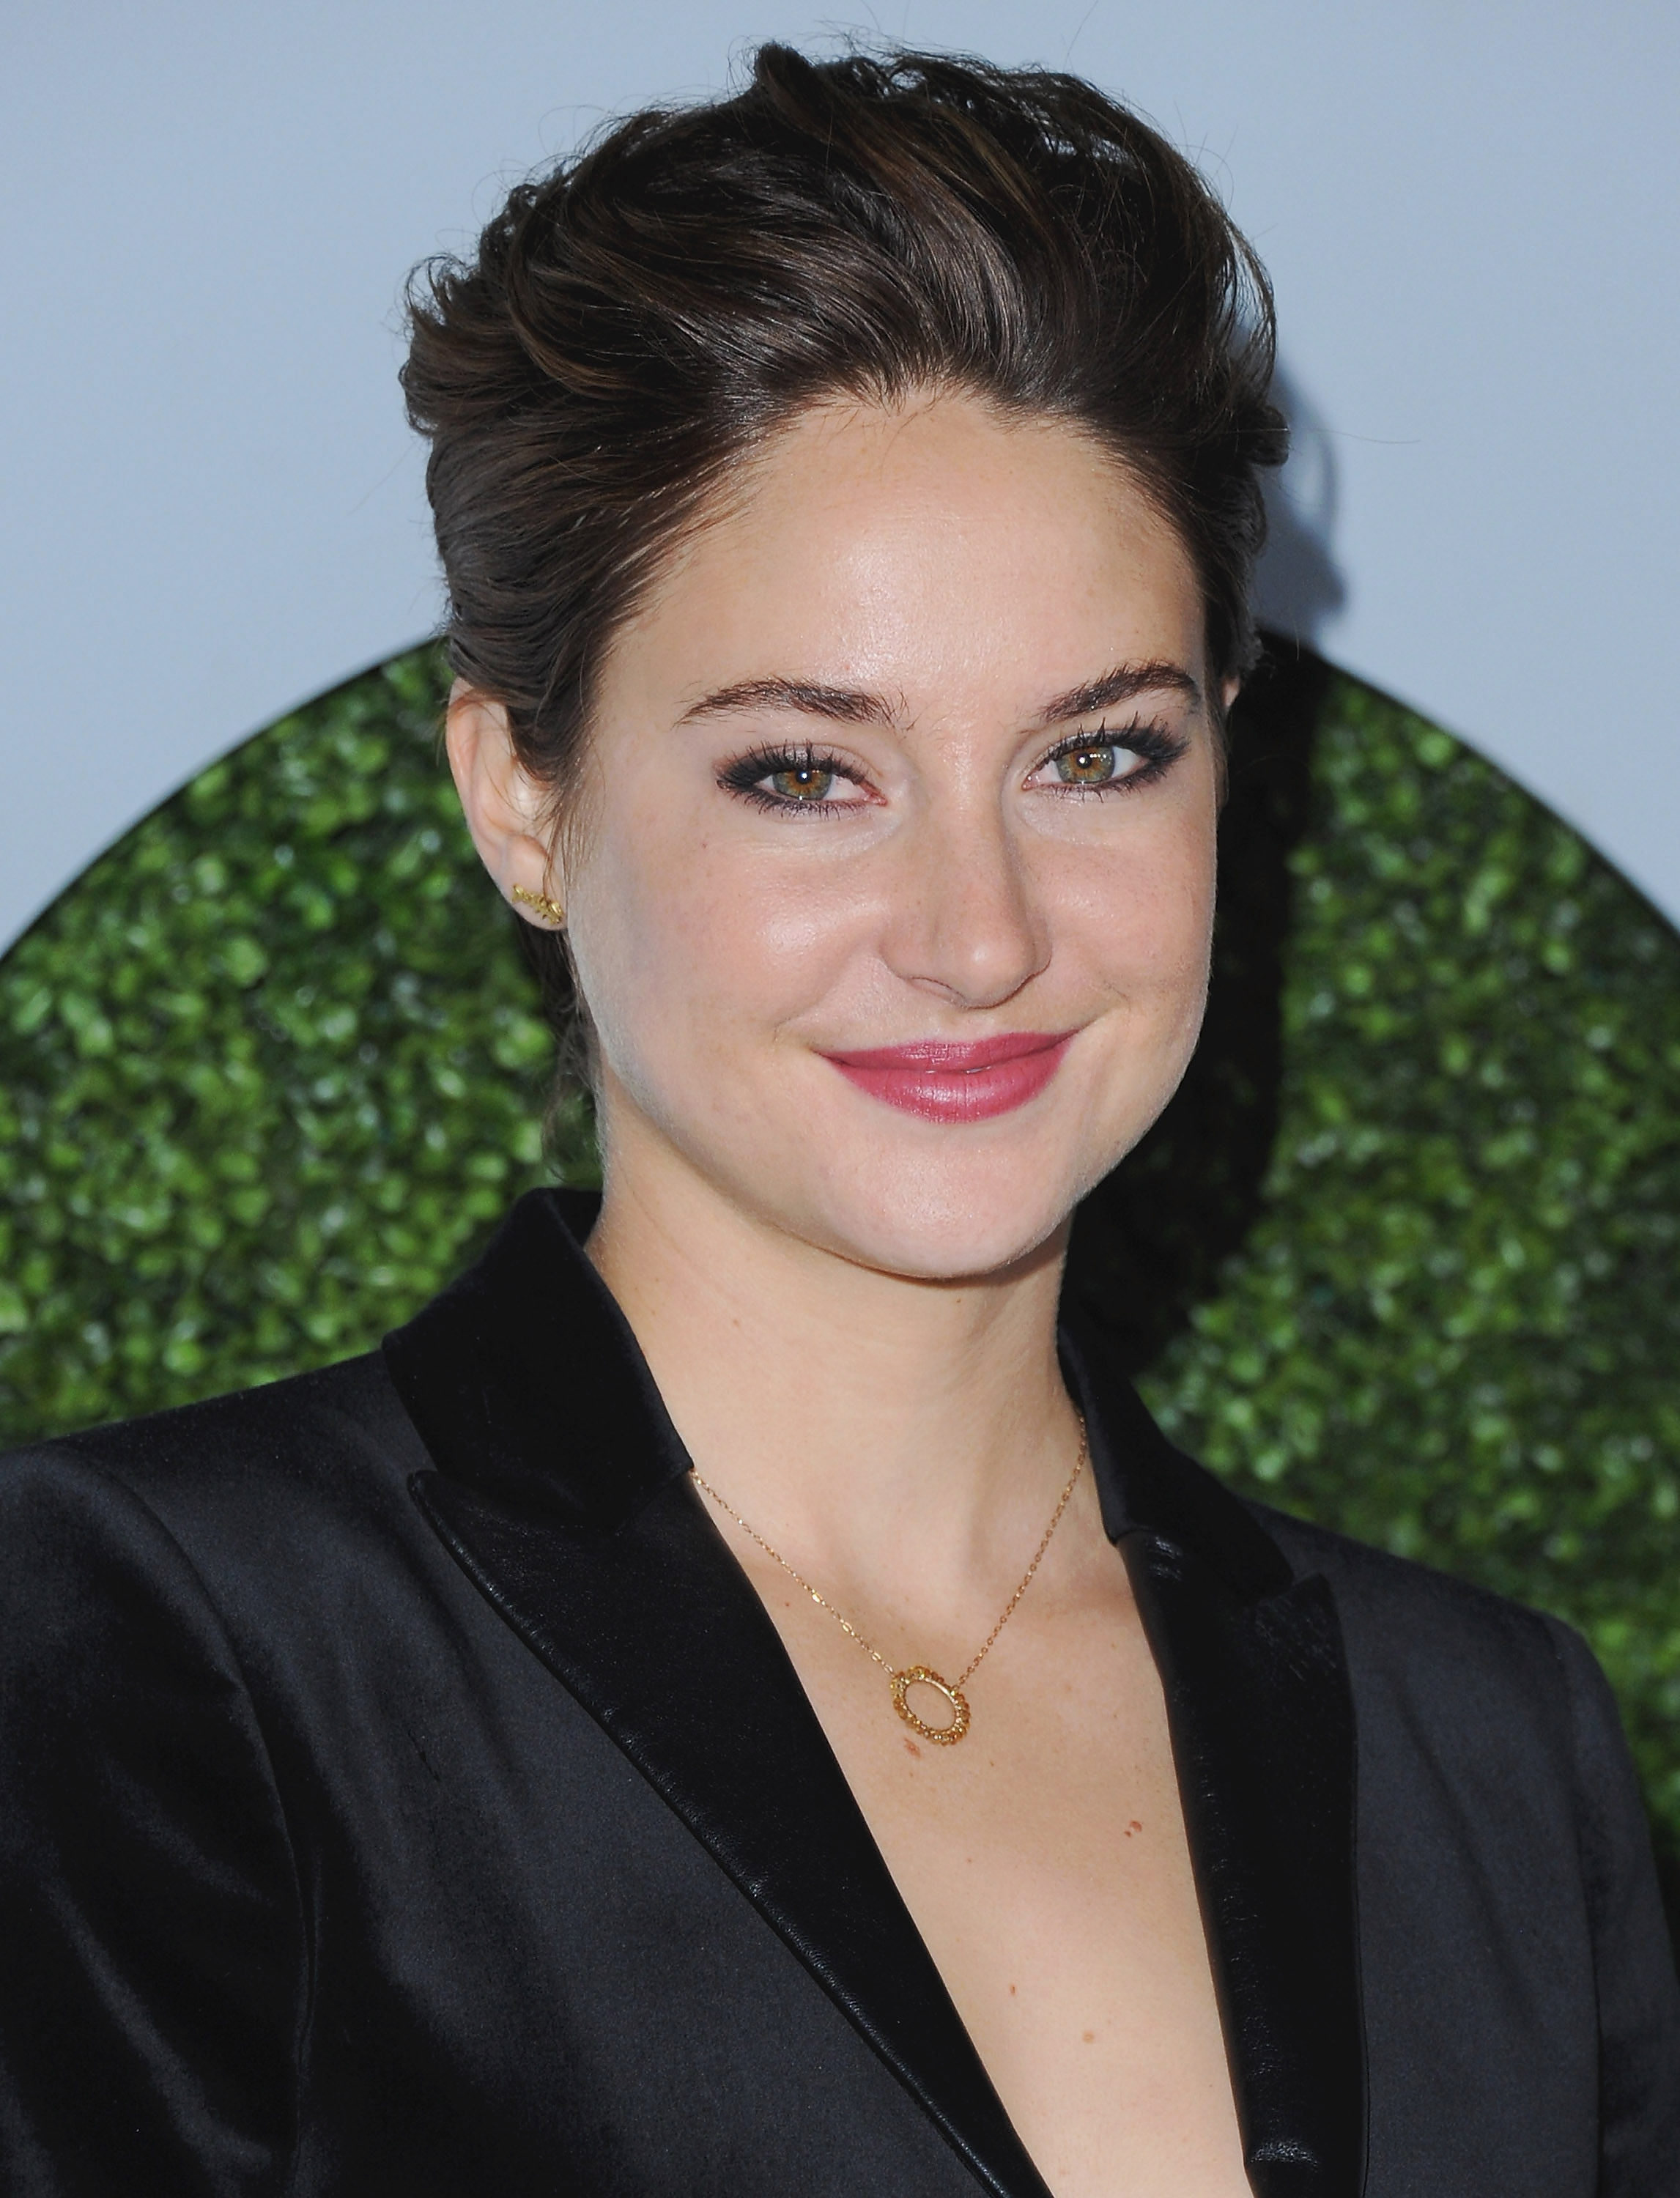 Actress Shailene Woodley arrives at the 2014 GQ Men Of The Year Party at Chateau Marmont on December 4, 2014 in Los Angeles, California. (Jon Kopaloff—FilmMagic/Getty Images)